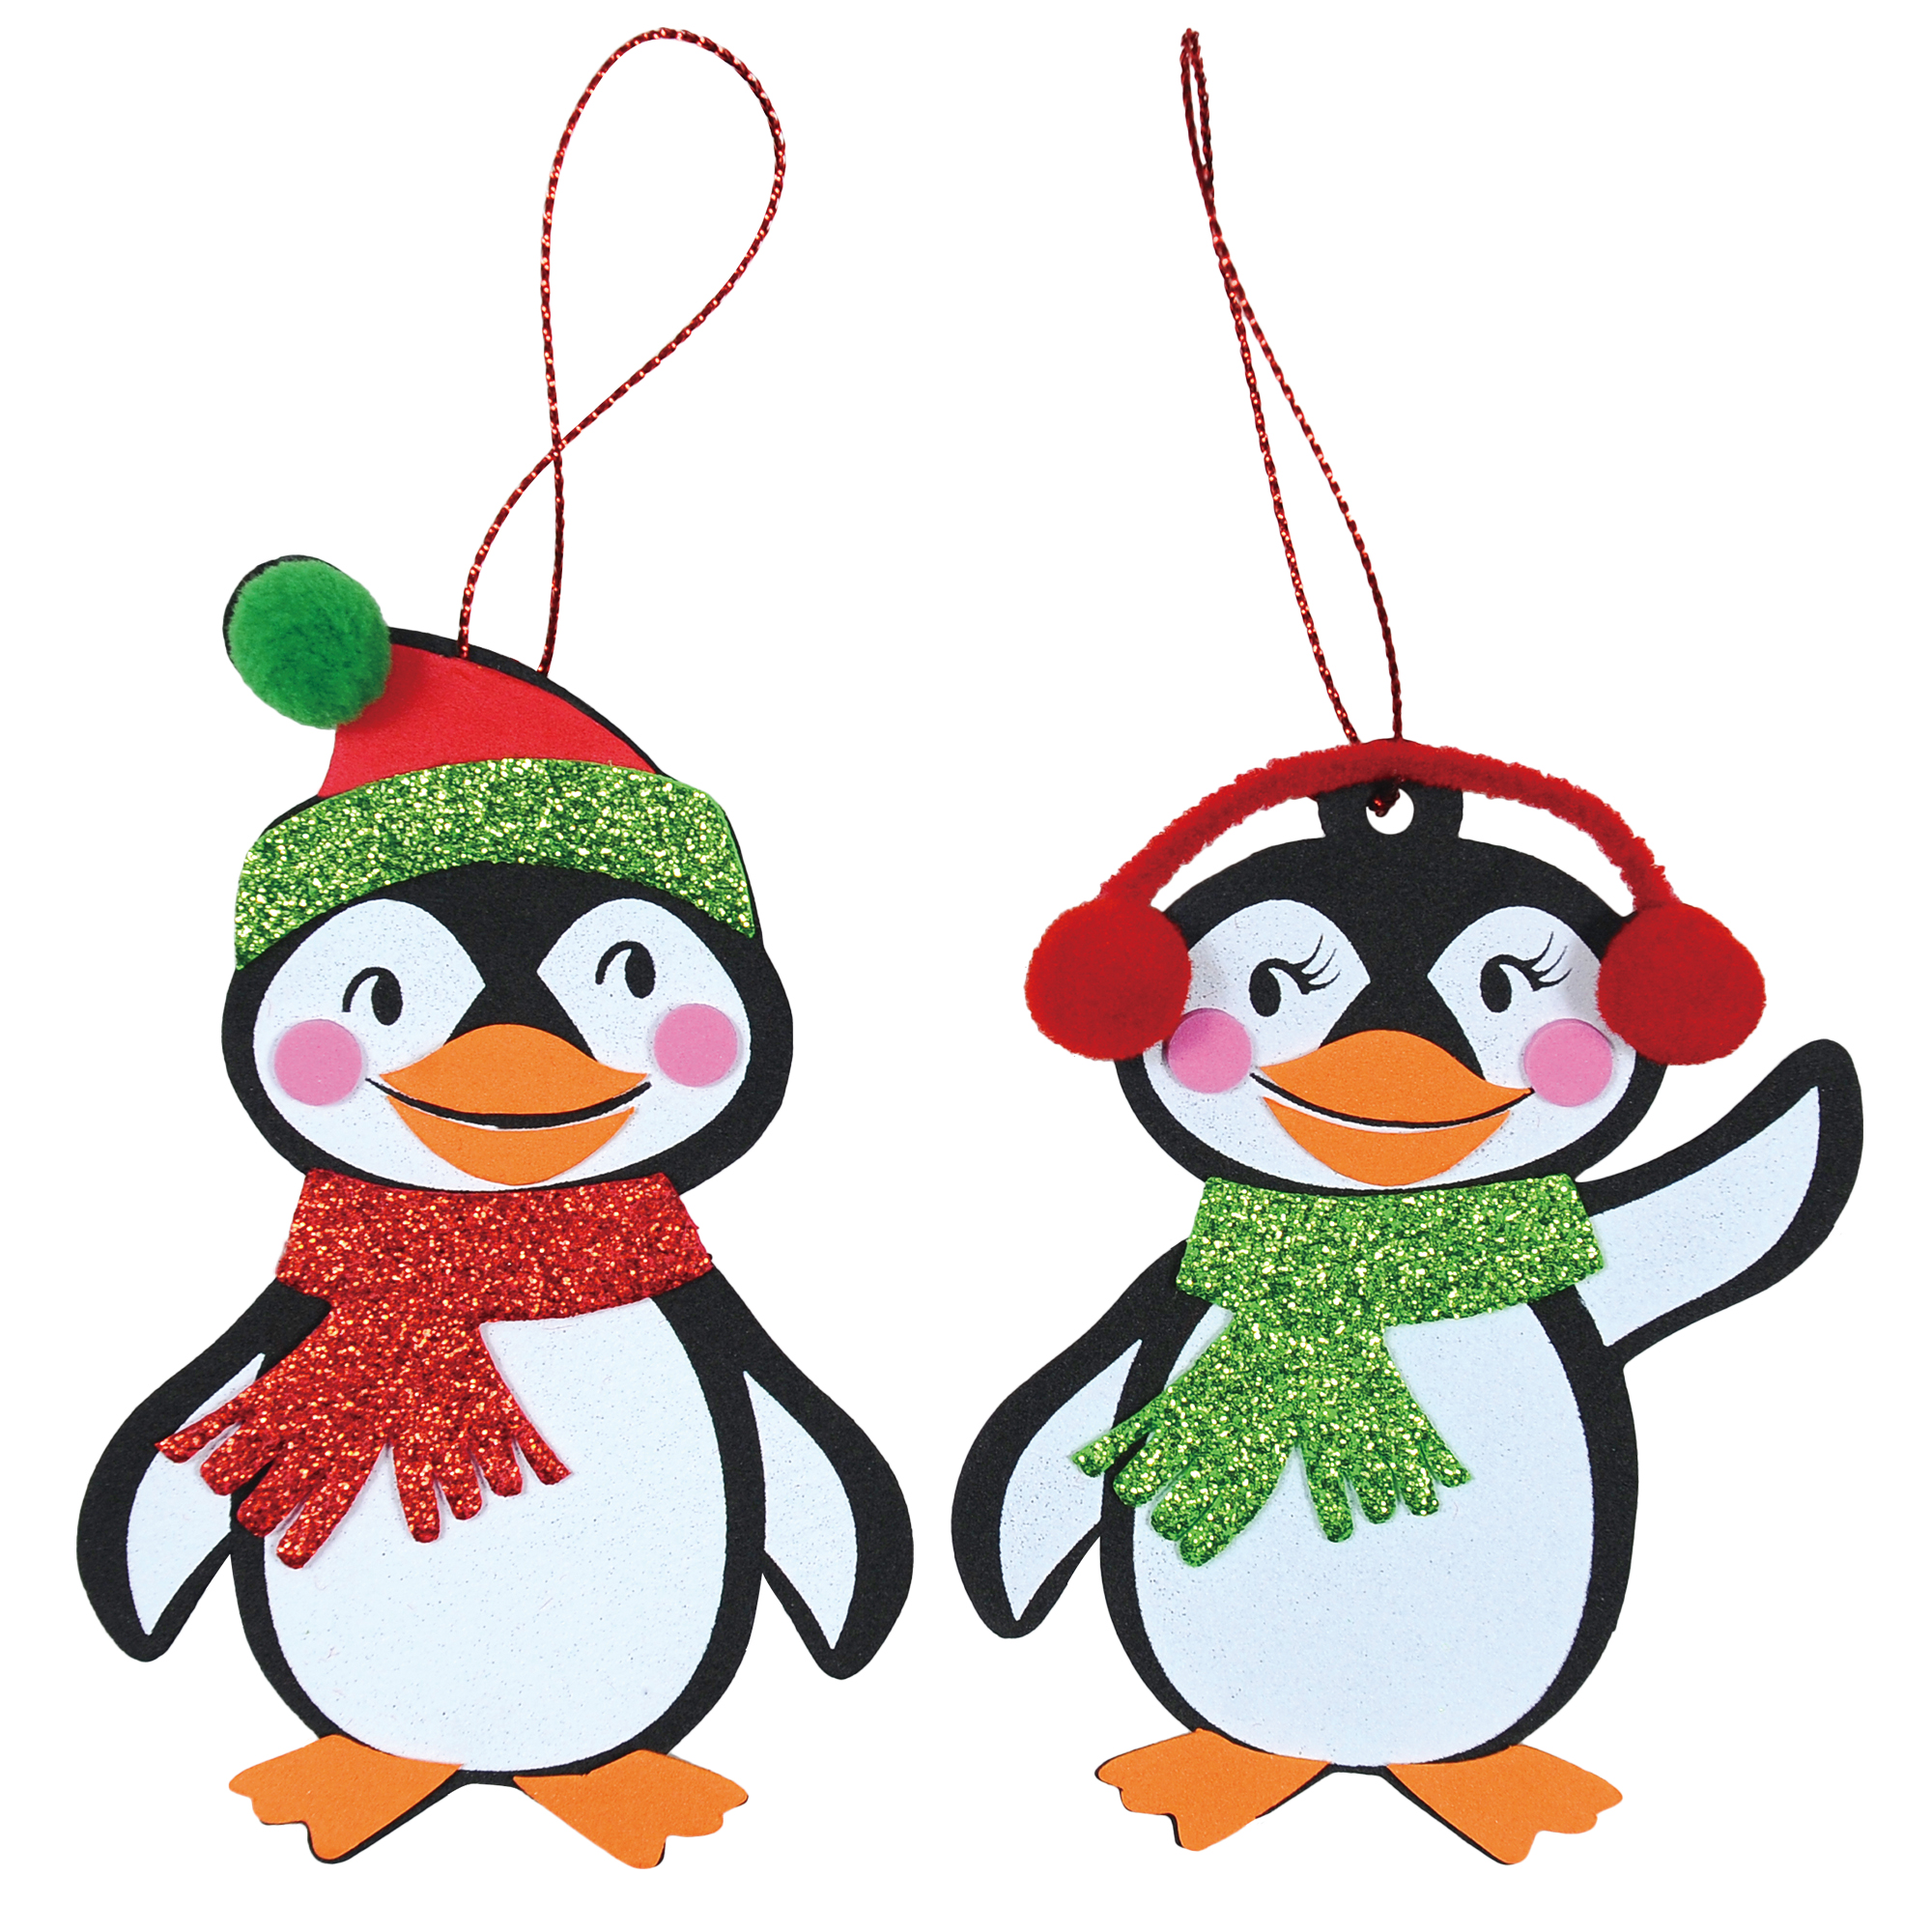 Buy the Penguin Ornaments Foam Craft Kit By Creatology™ at Michaels